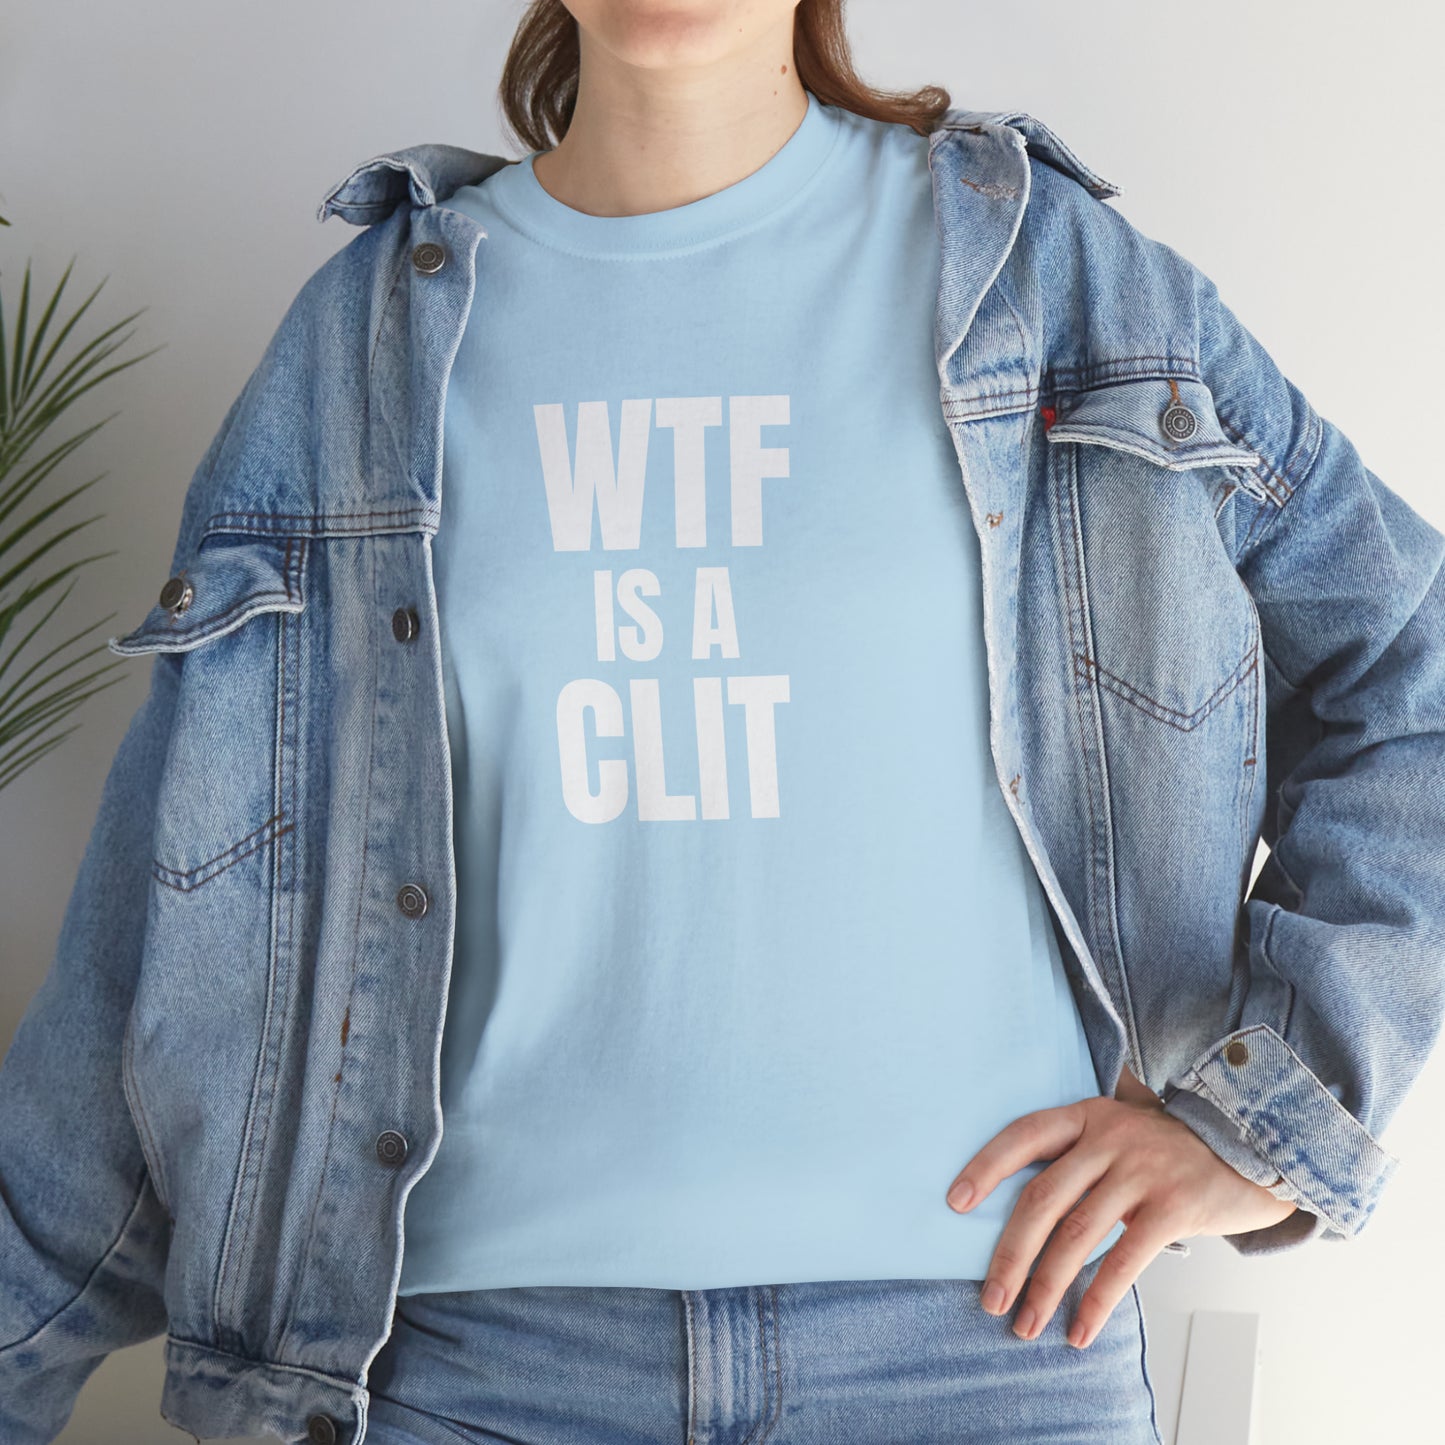 WTF IS A CLIT